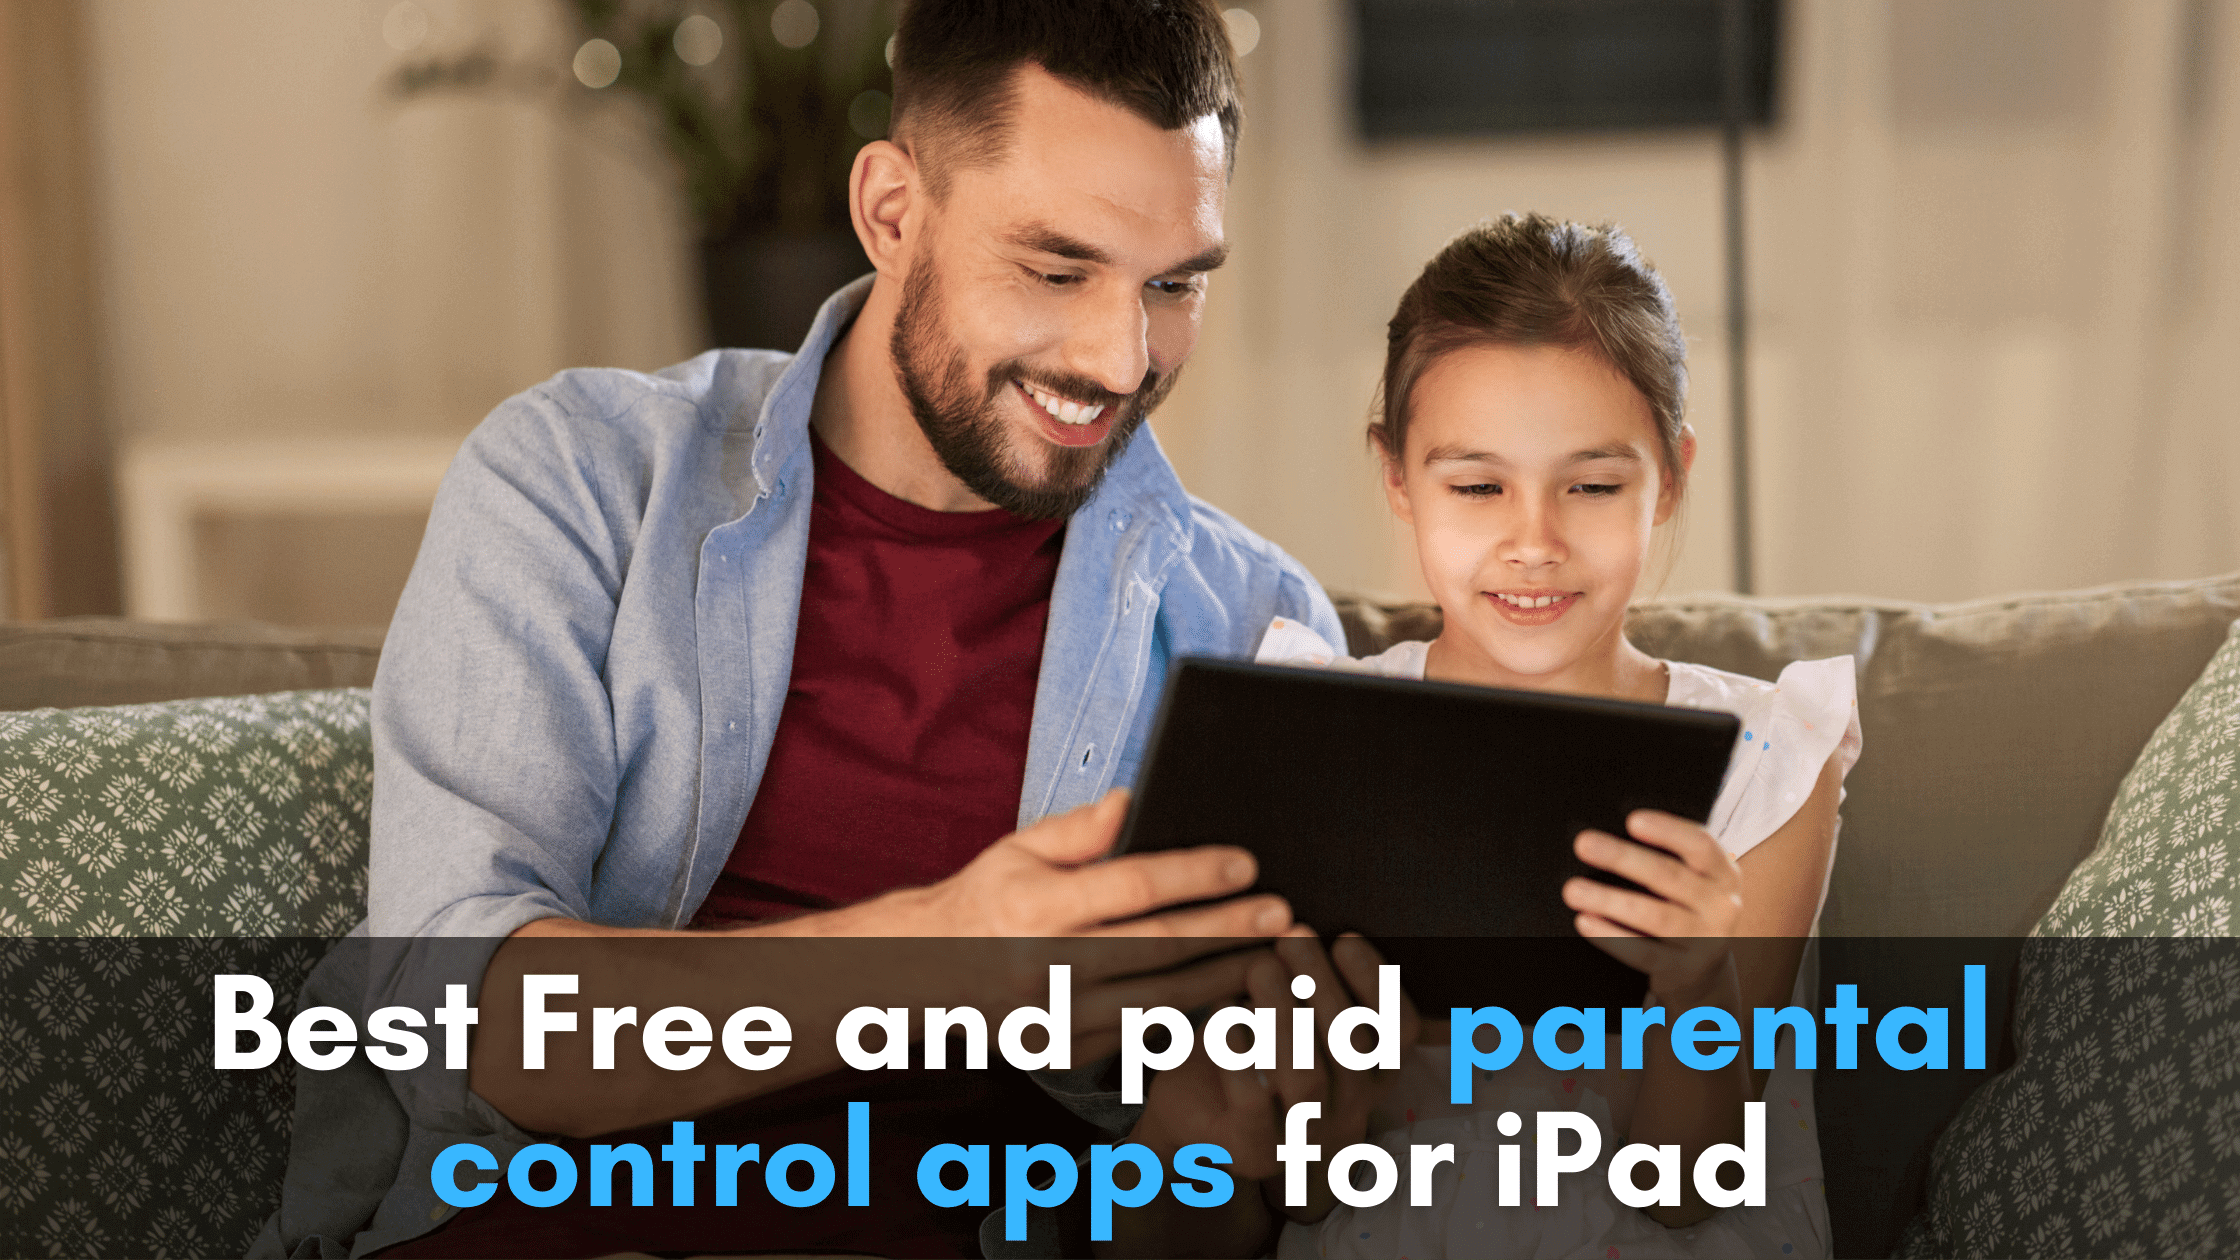 Best Free and paid parental control apps for iPad in 2020